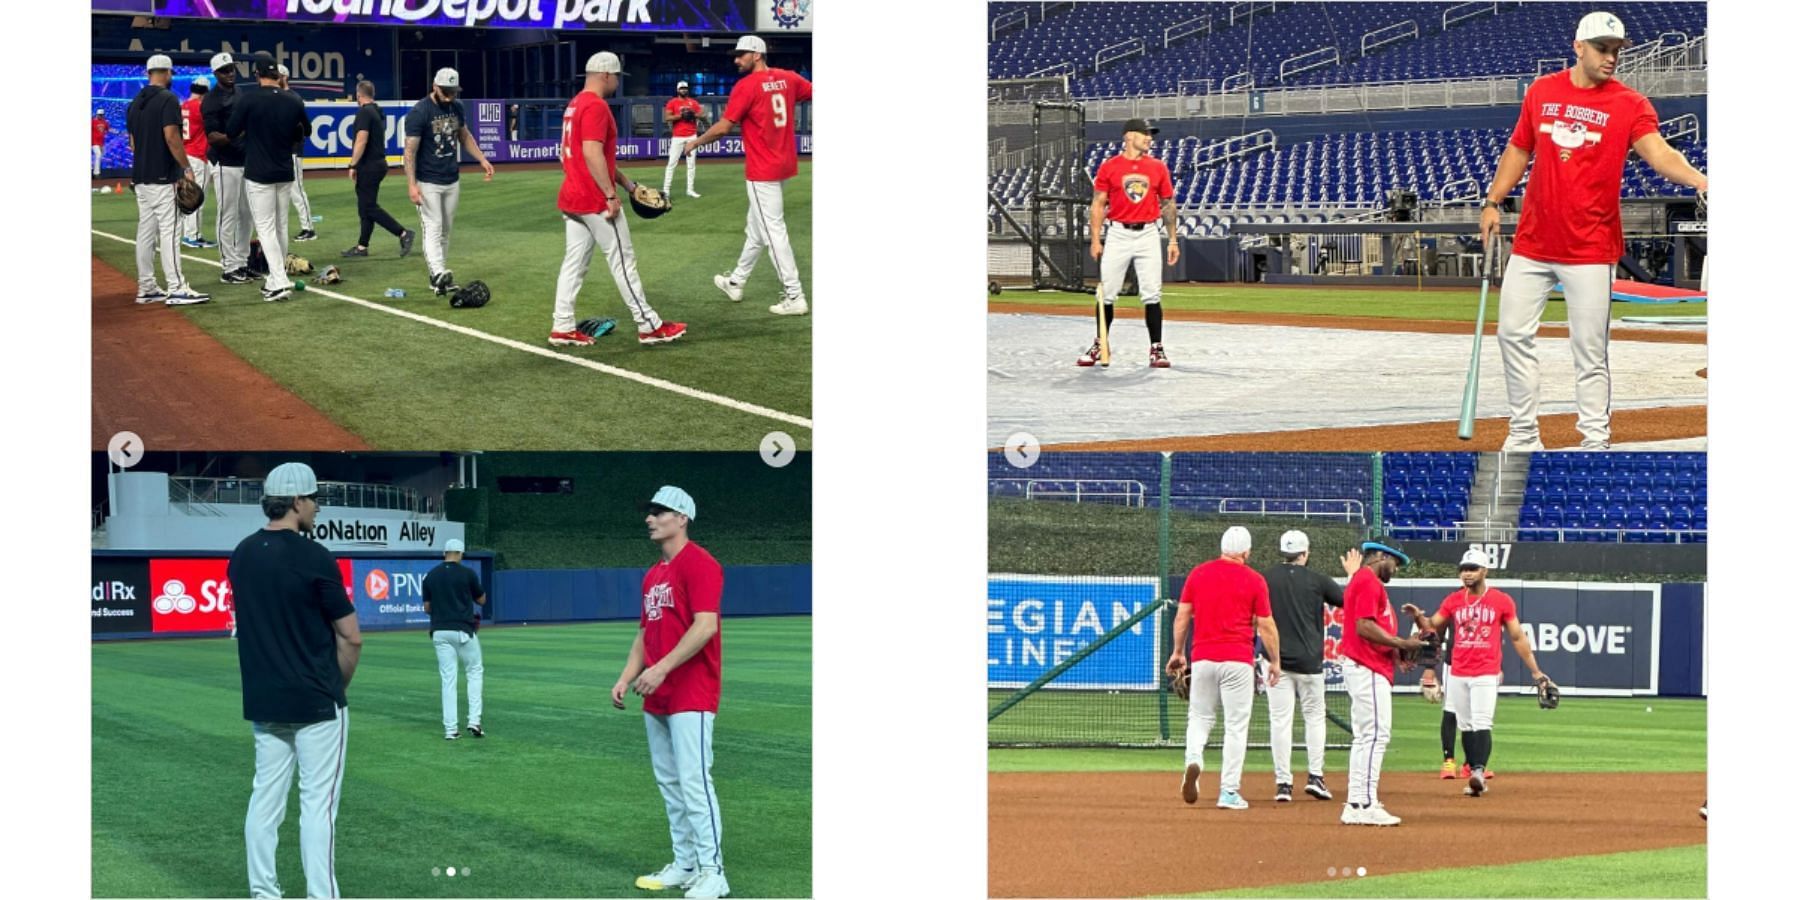 Miami players sport Florida Panthers gear in practice (Image from B/R walk-off, h/t Christina De Nicola)